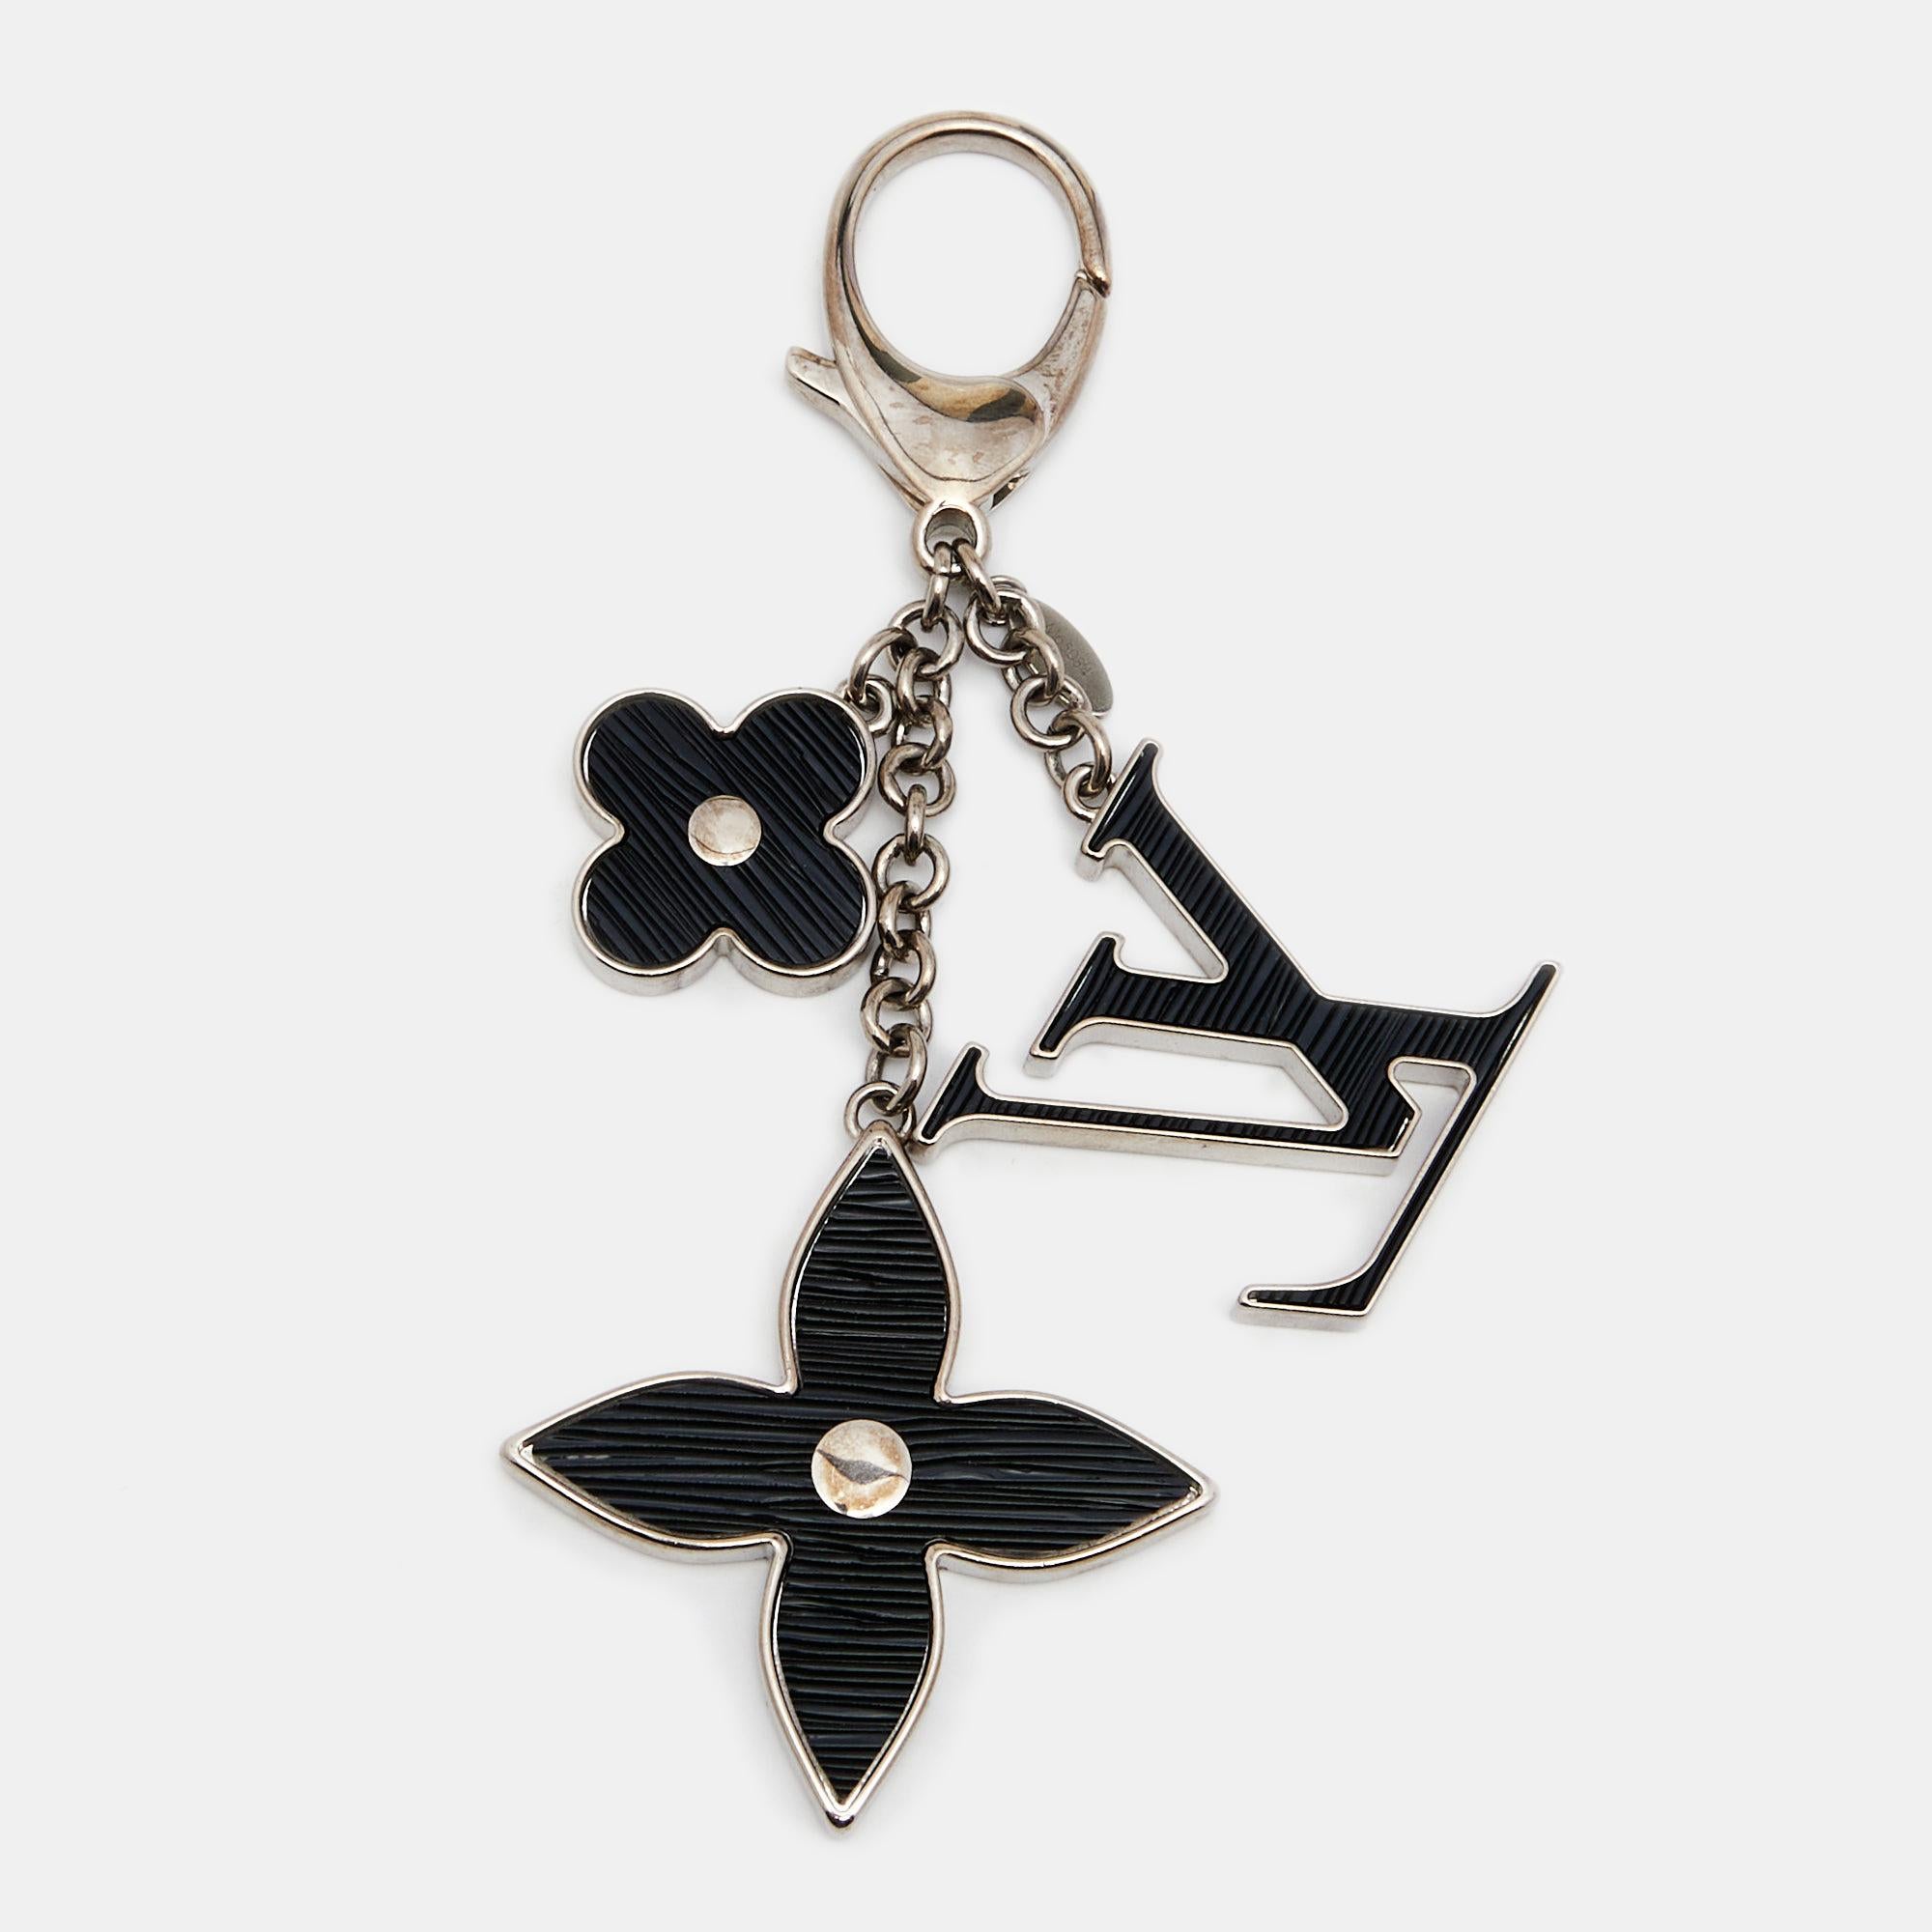 Louis Vuitton’s bag charm is for every LV fan or handbag lover. With monogram flowers and the LV logo attached to silver-tone chains, this piece is sure to delight your bag collection. It is completed with the brand's label engraved on the lobster